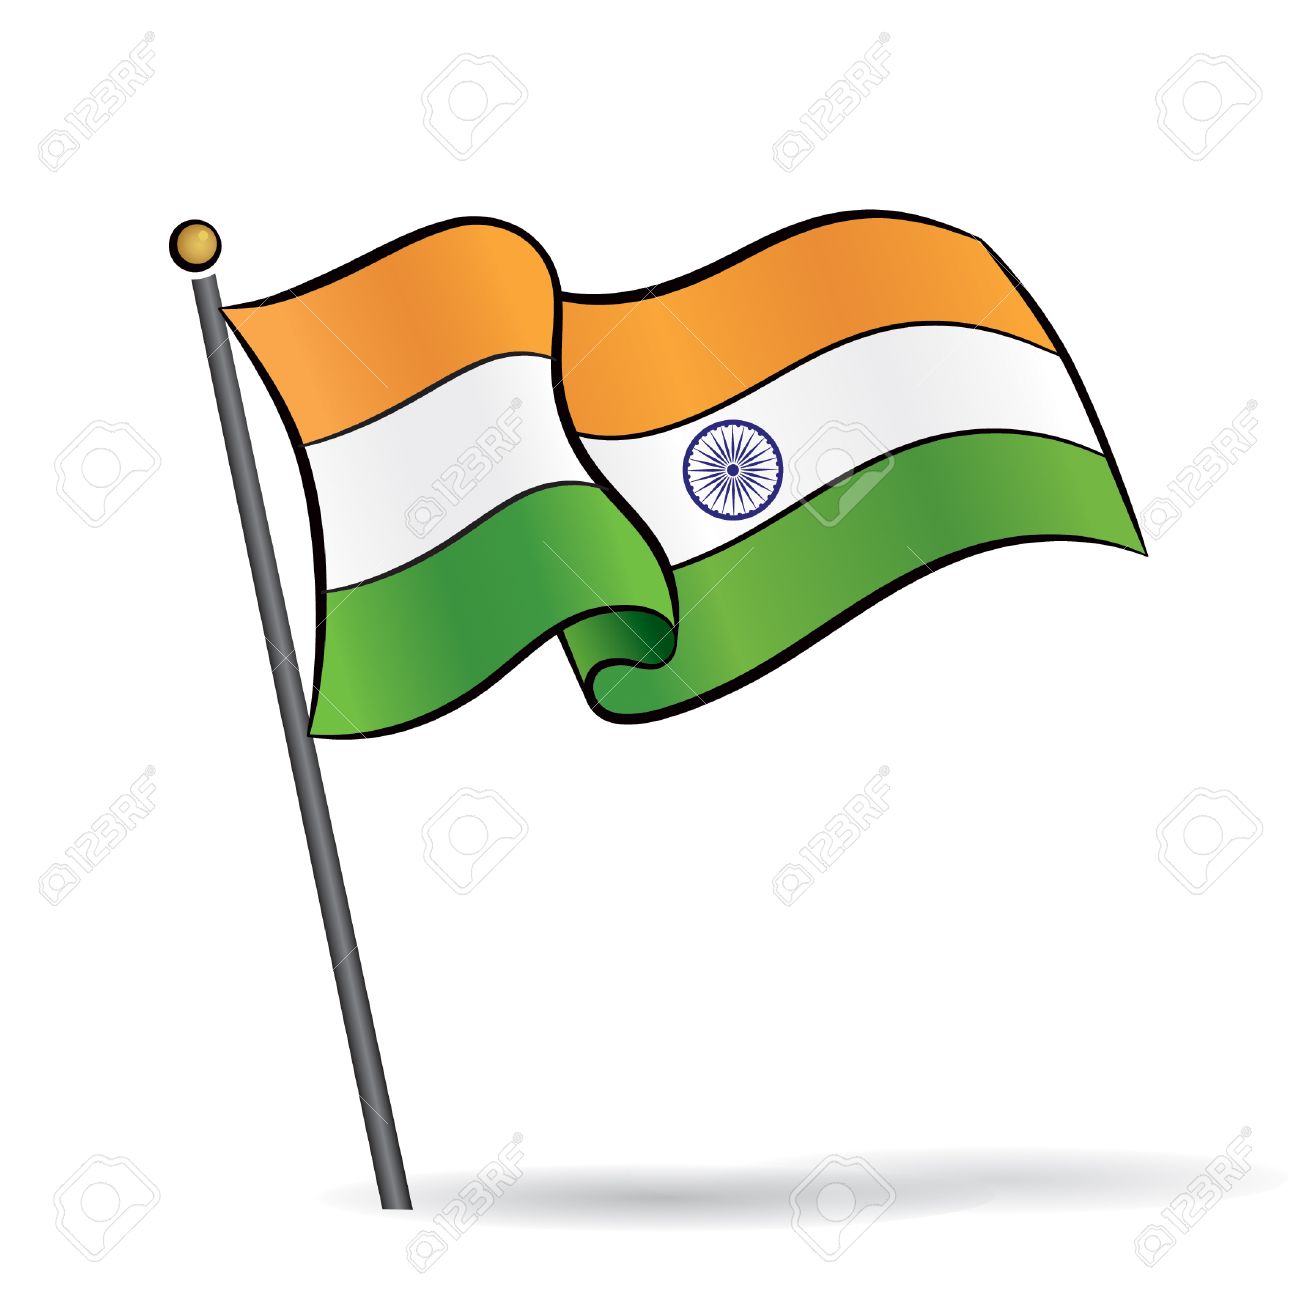 Clipart Of National Flag.